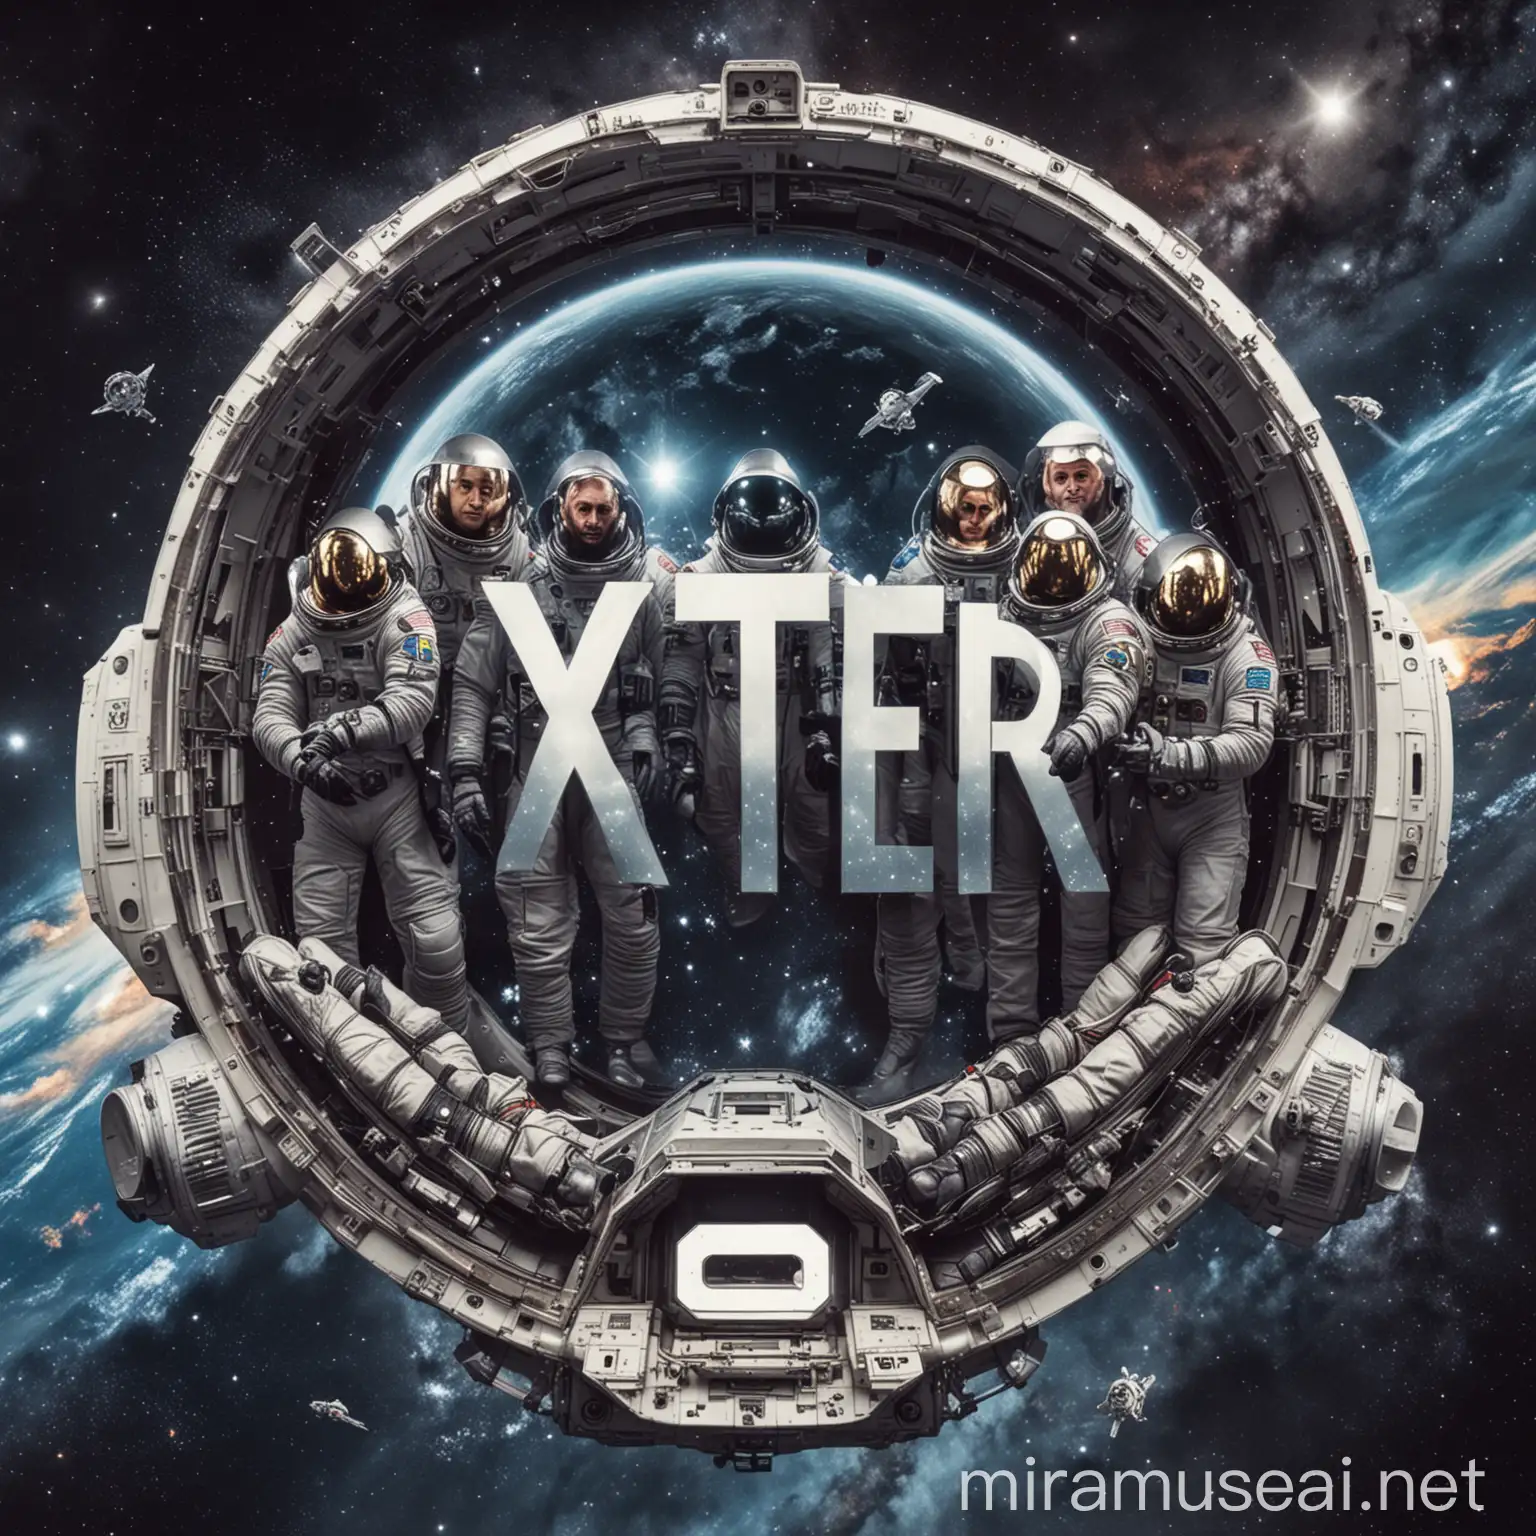 Exploration in Space with XTER Logo Adorning Spaceship